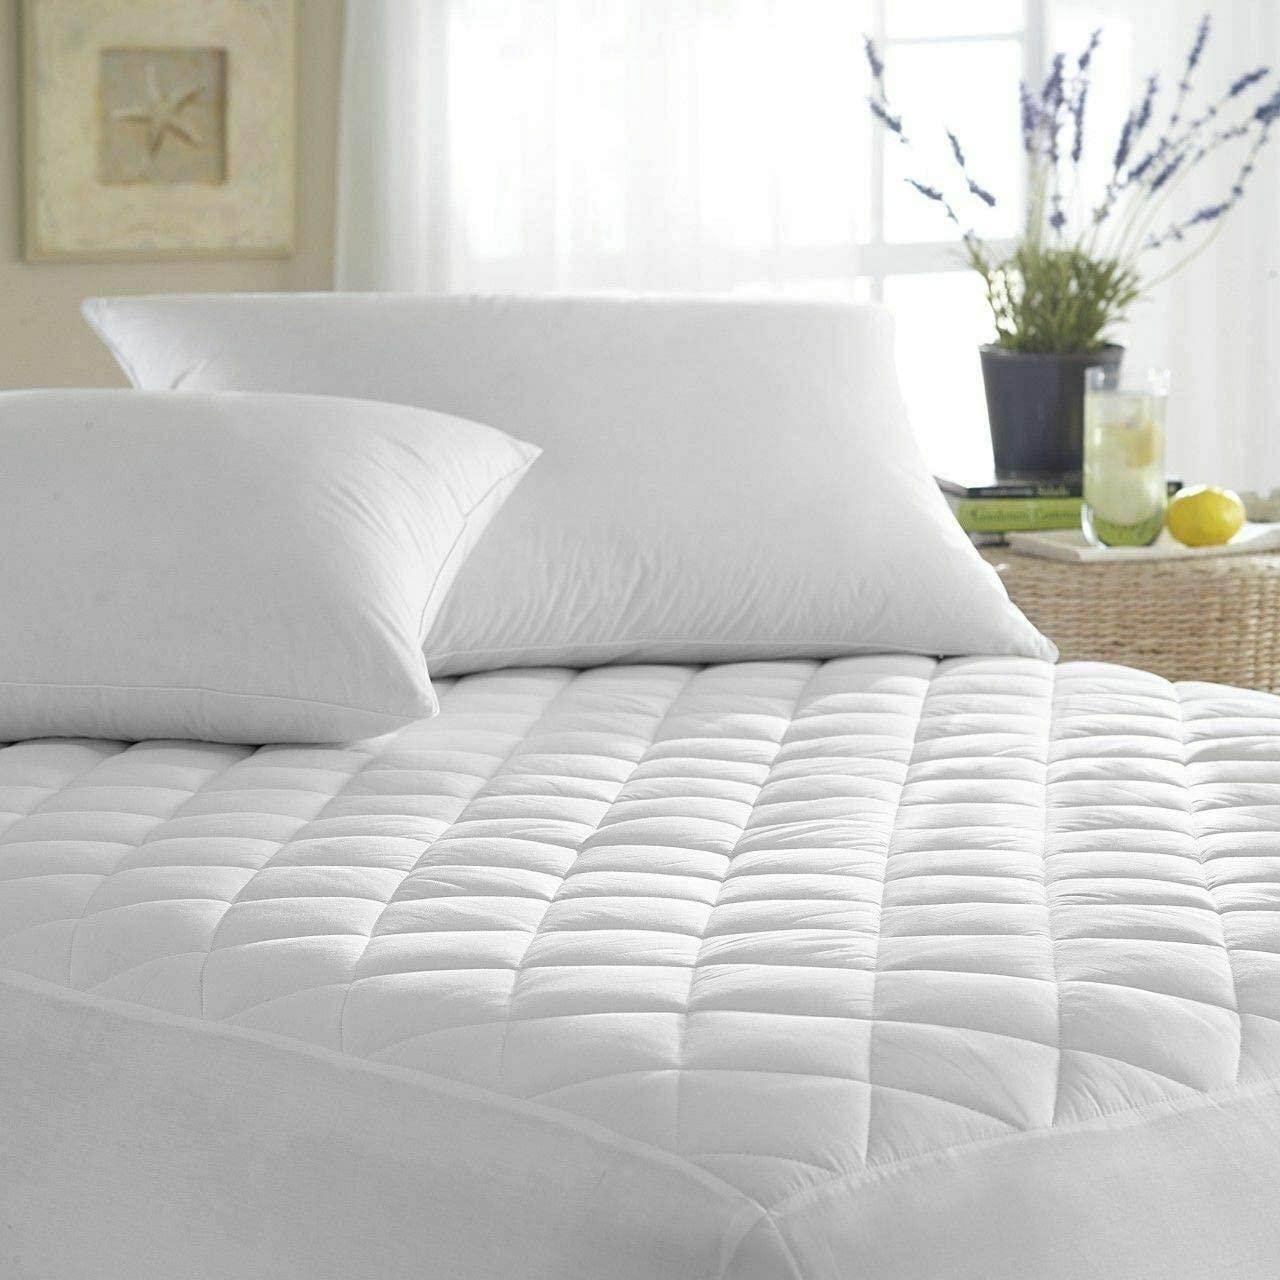 Breathable Noiseless Hypoallergenic ZNR Triple Filled Quilted Mattress Protector Super king Mattress Topper Fitted Sheet Style Bed Cover 40 CM Extra Deep Skirt Dust Mite Proof 